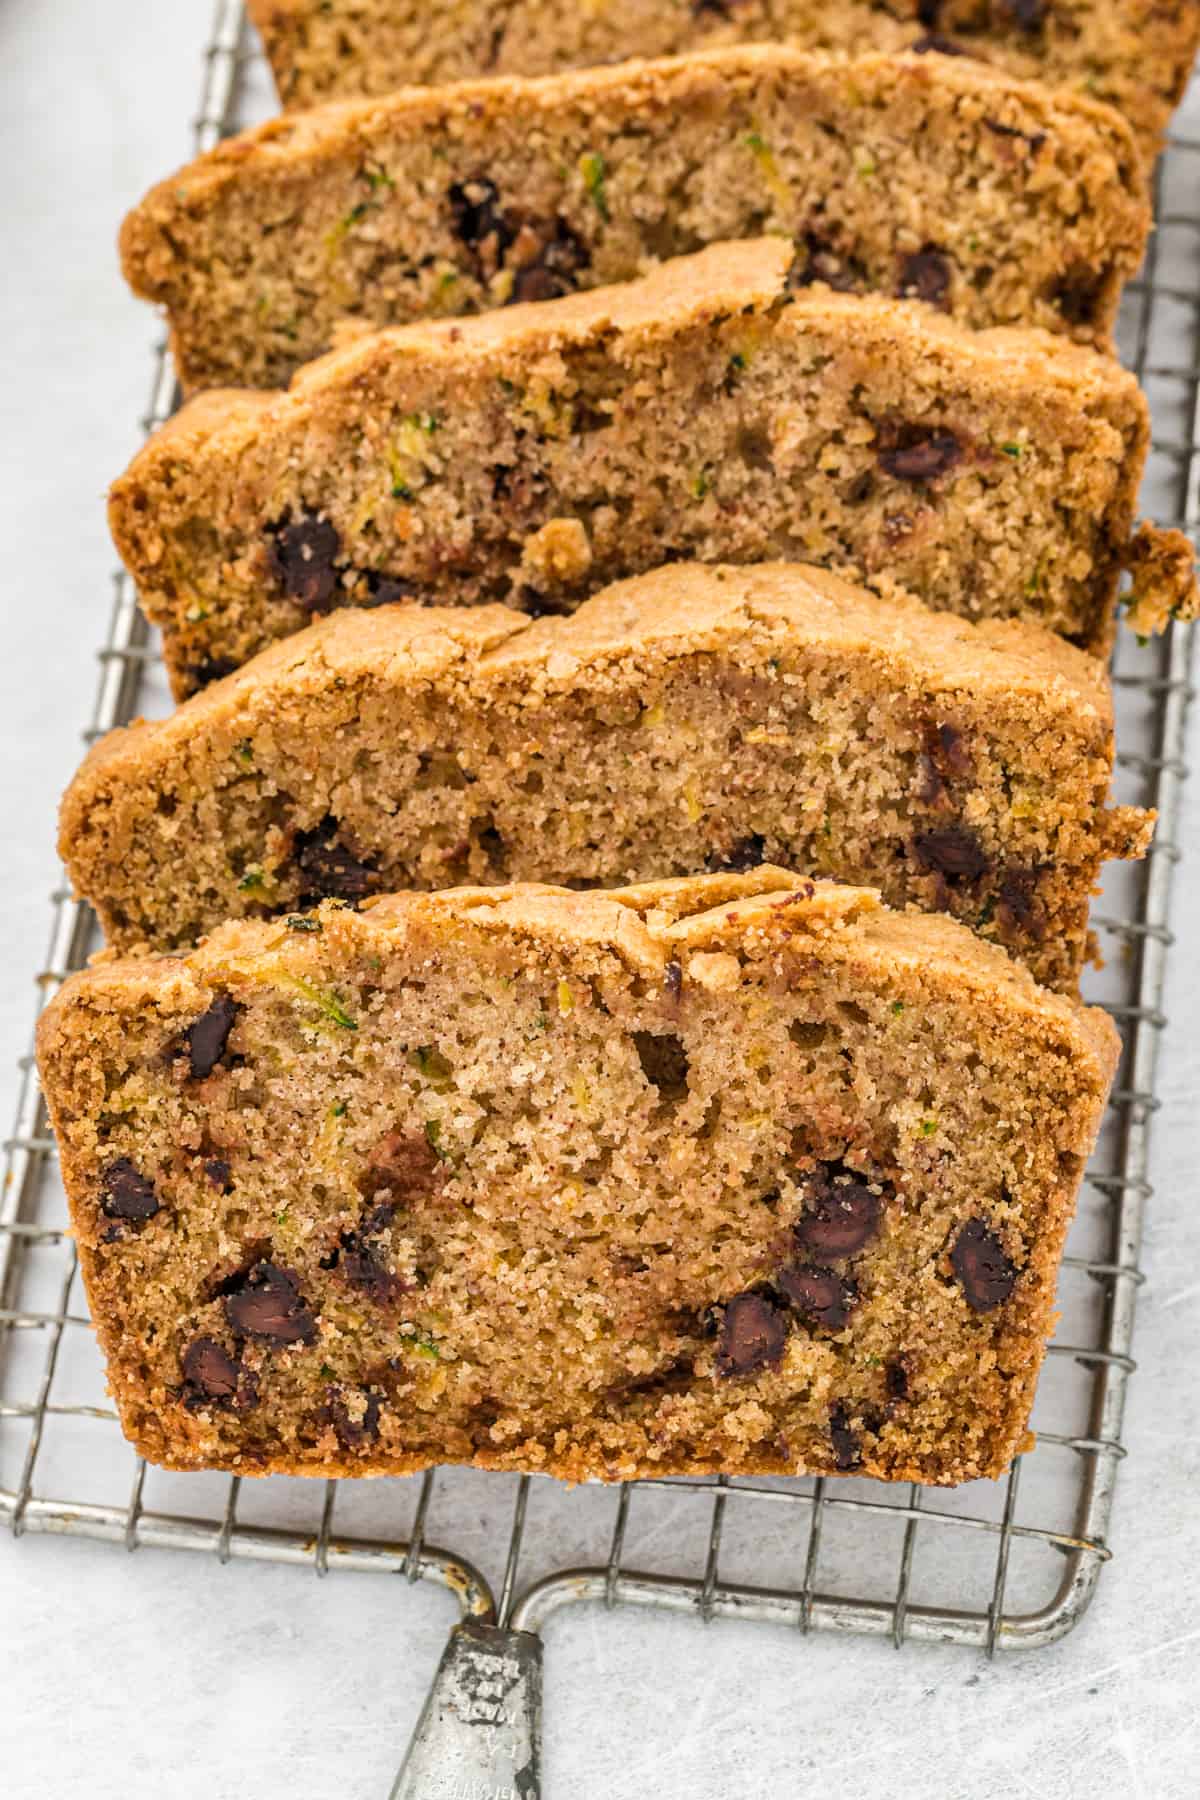 Chocolate Chip Zucchini Bread slices on a wire rack.